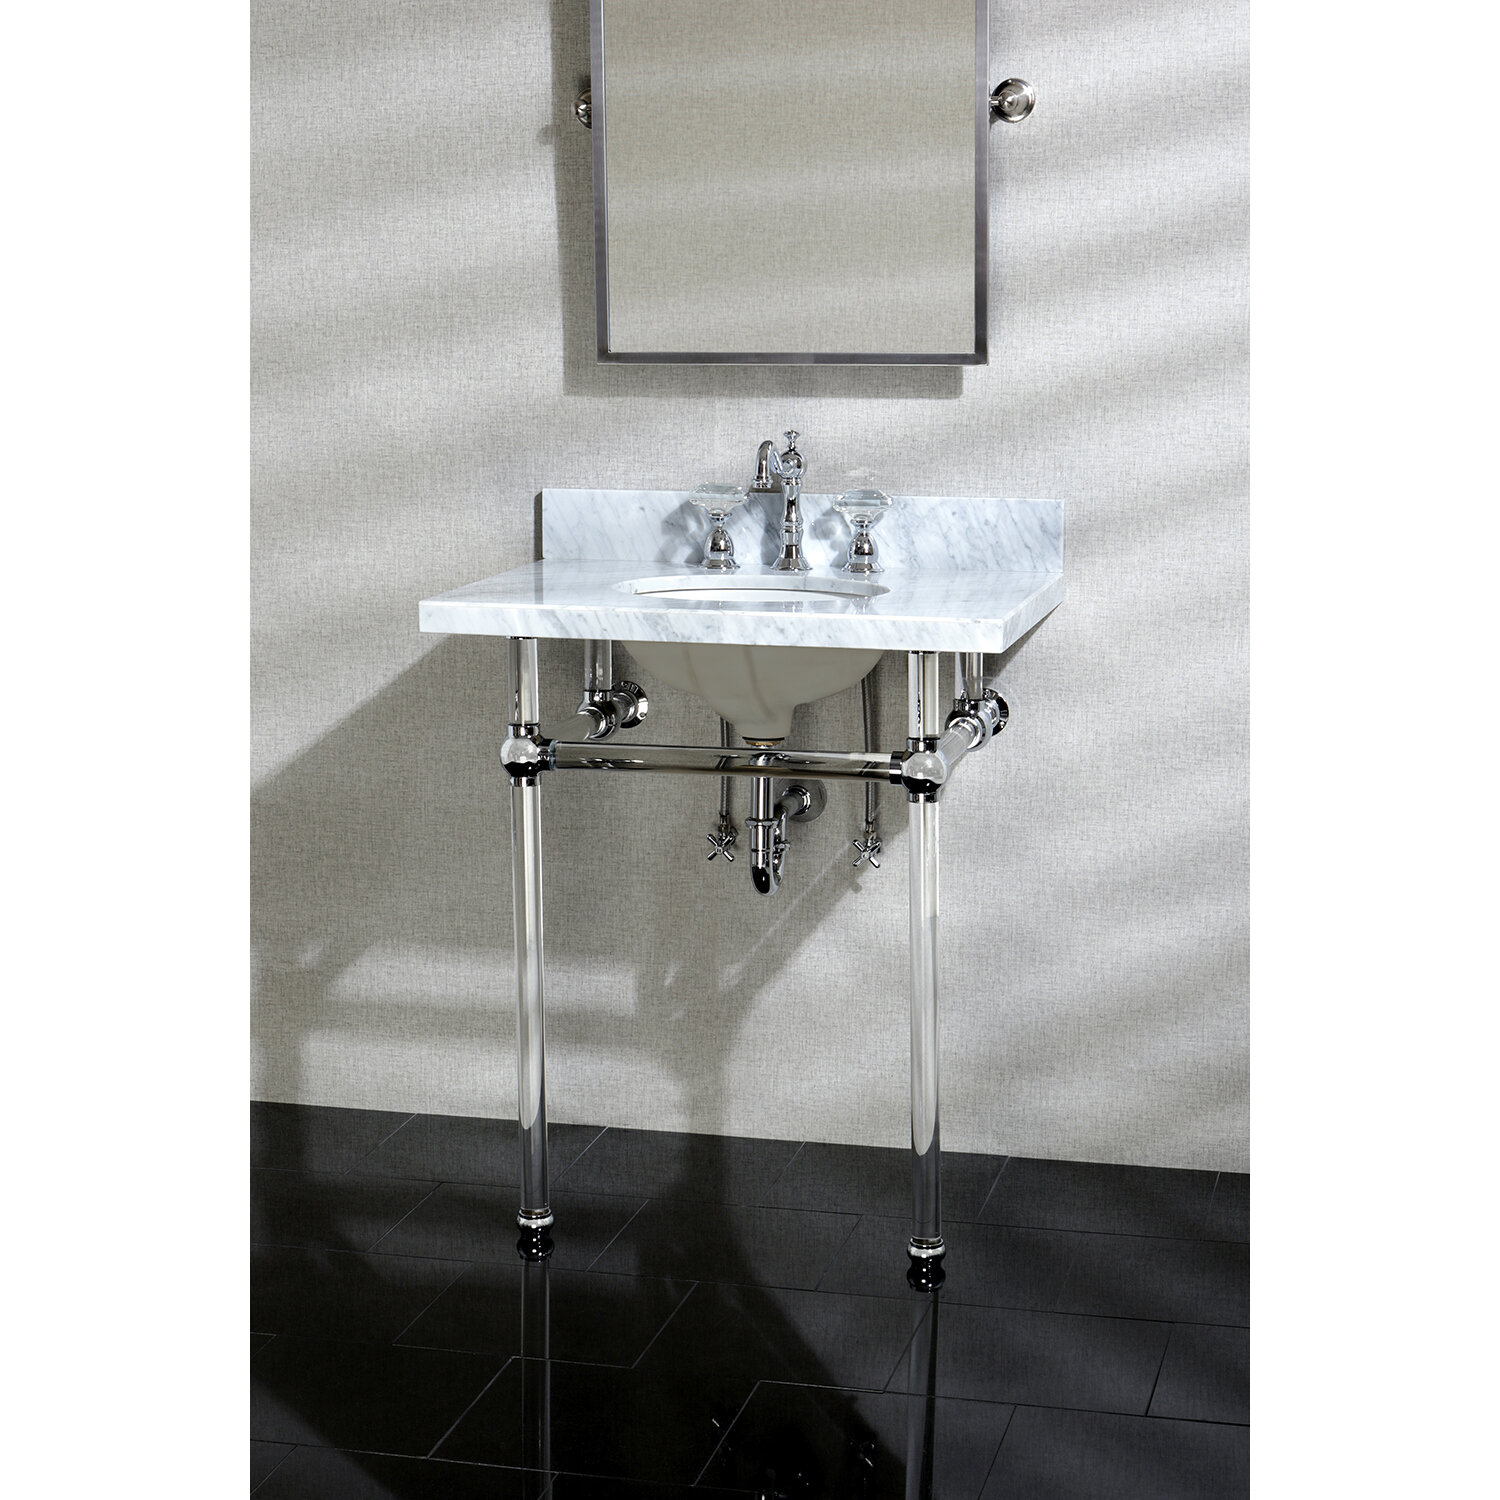 Templeton 33 Tall Oval Console Bathroom Sink with Overflow & Reviews